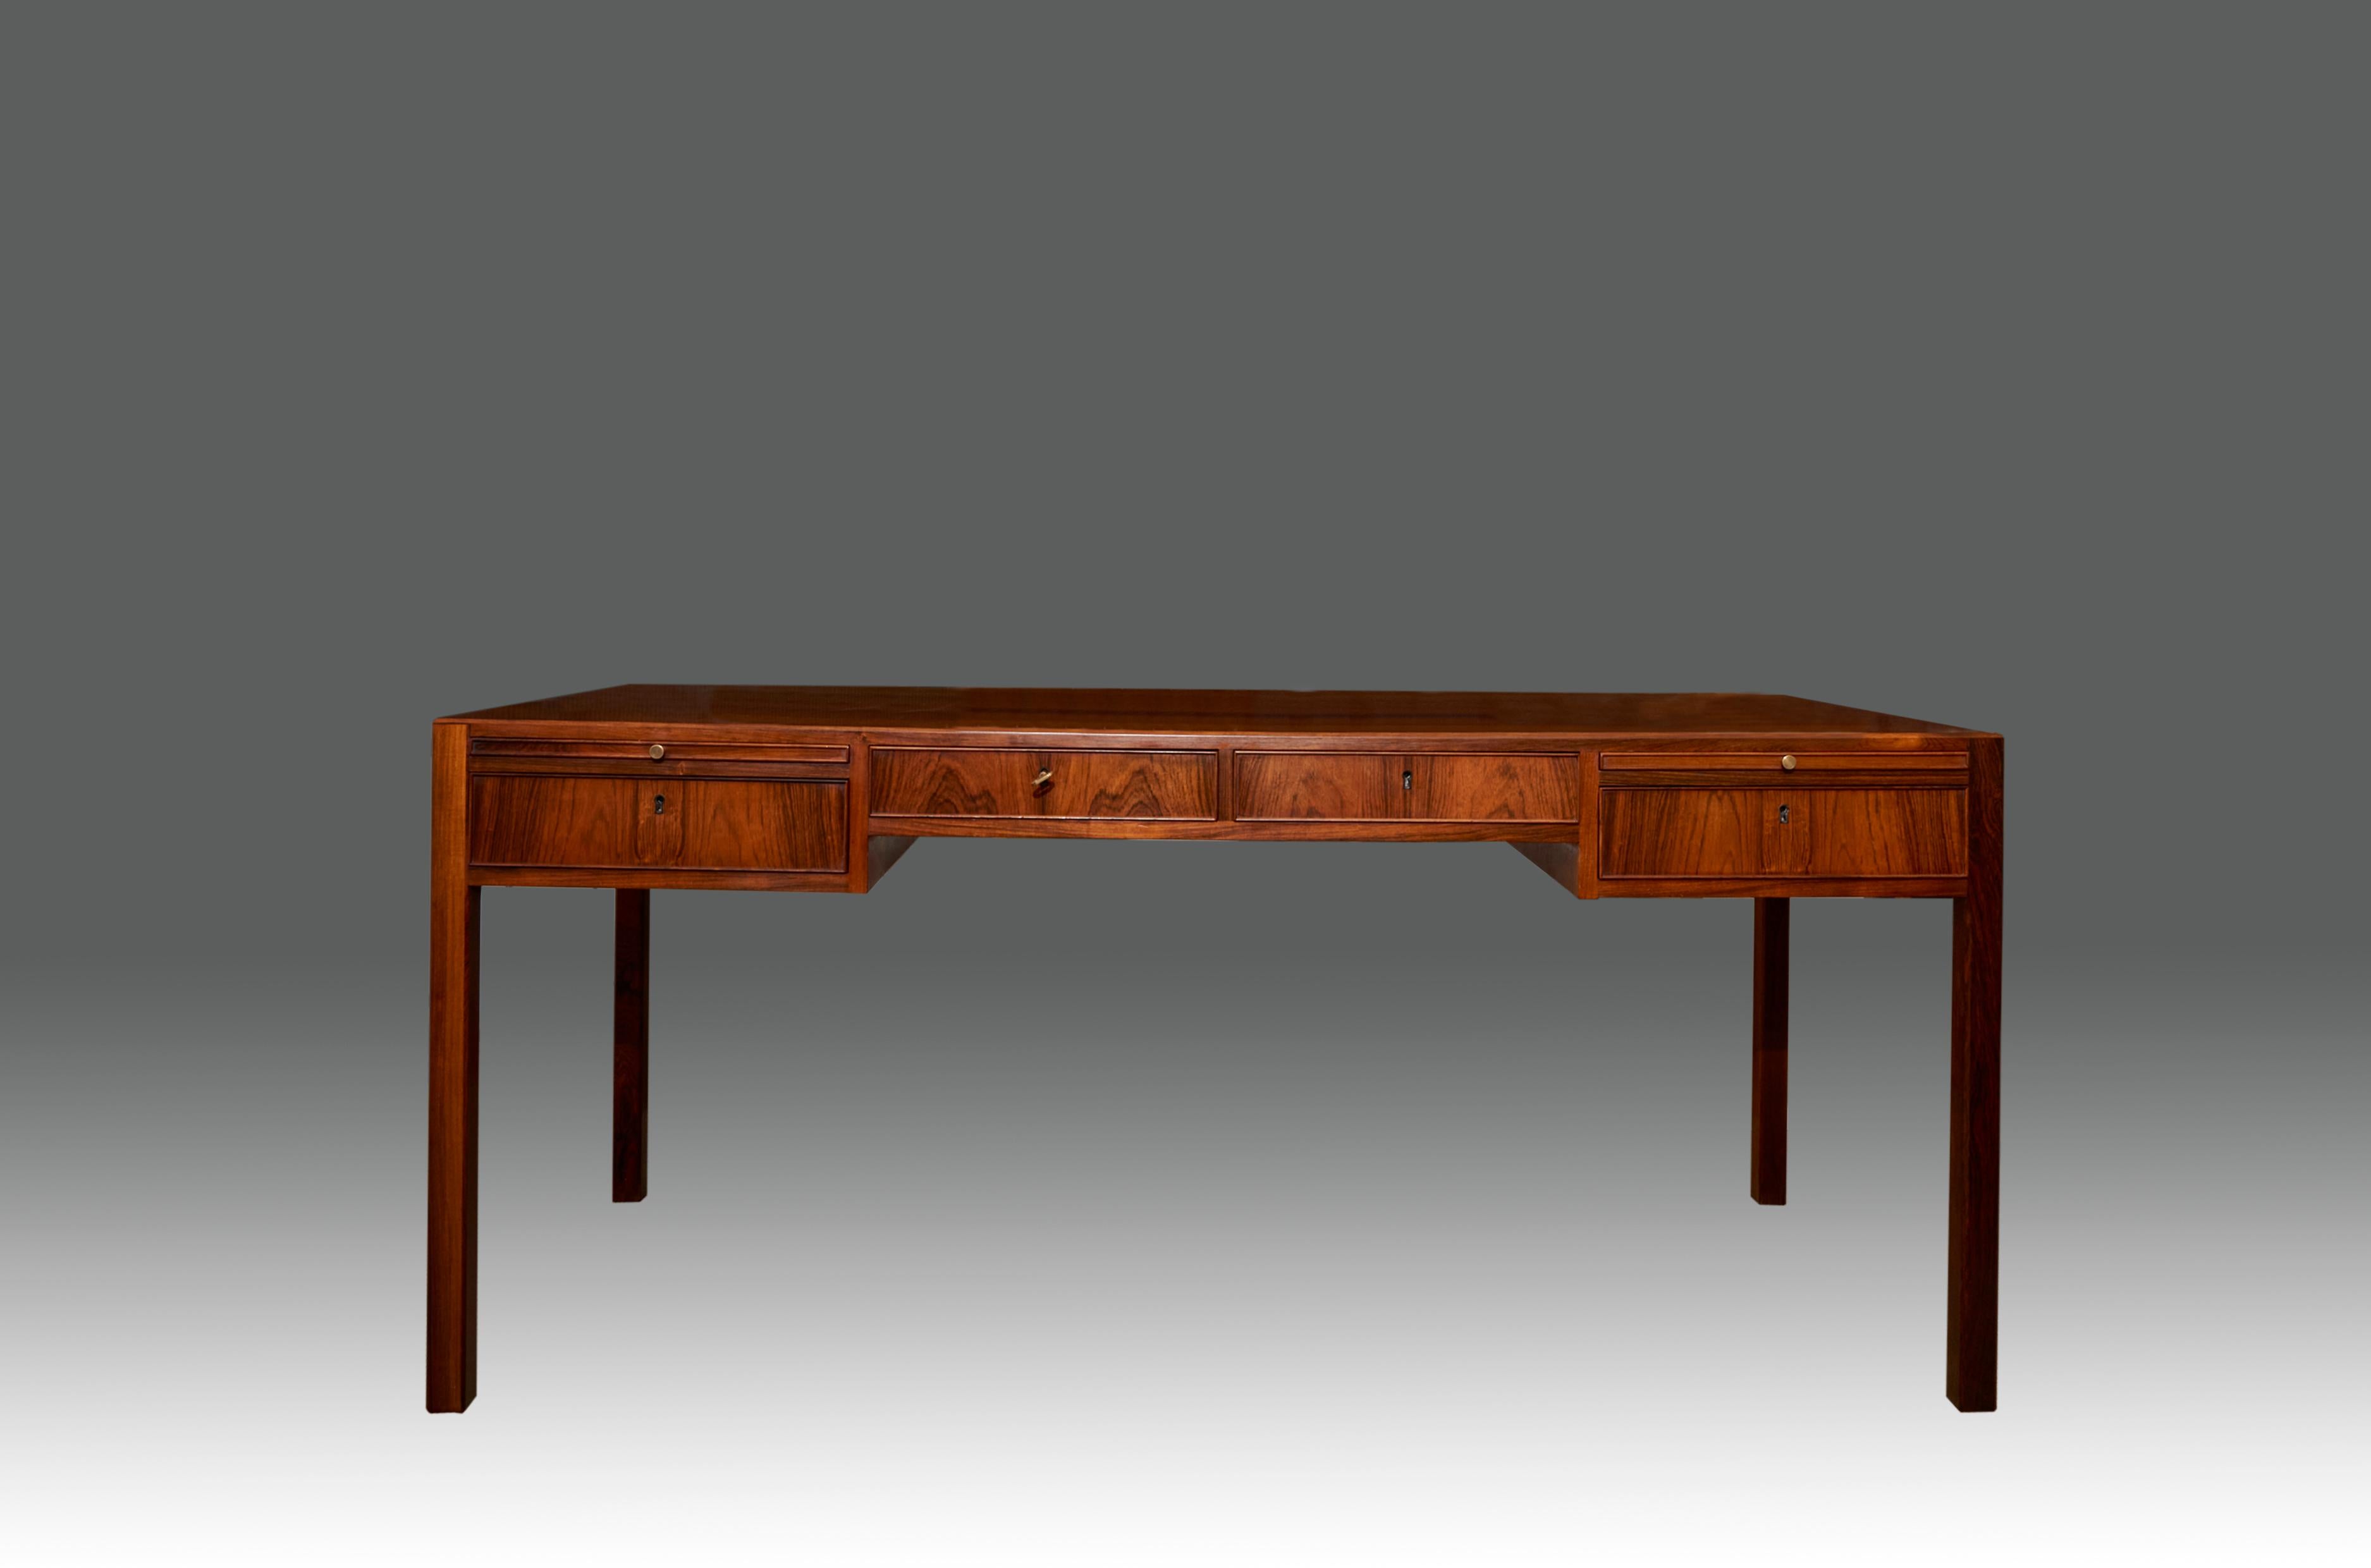 Danish desk by unknown designer. Made in Rosewood with brass handlers. Excellent refinished condition. Denmark, 1960’s.
 